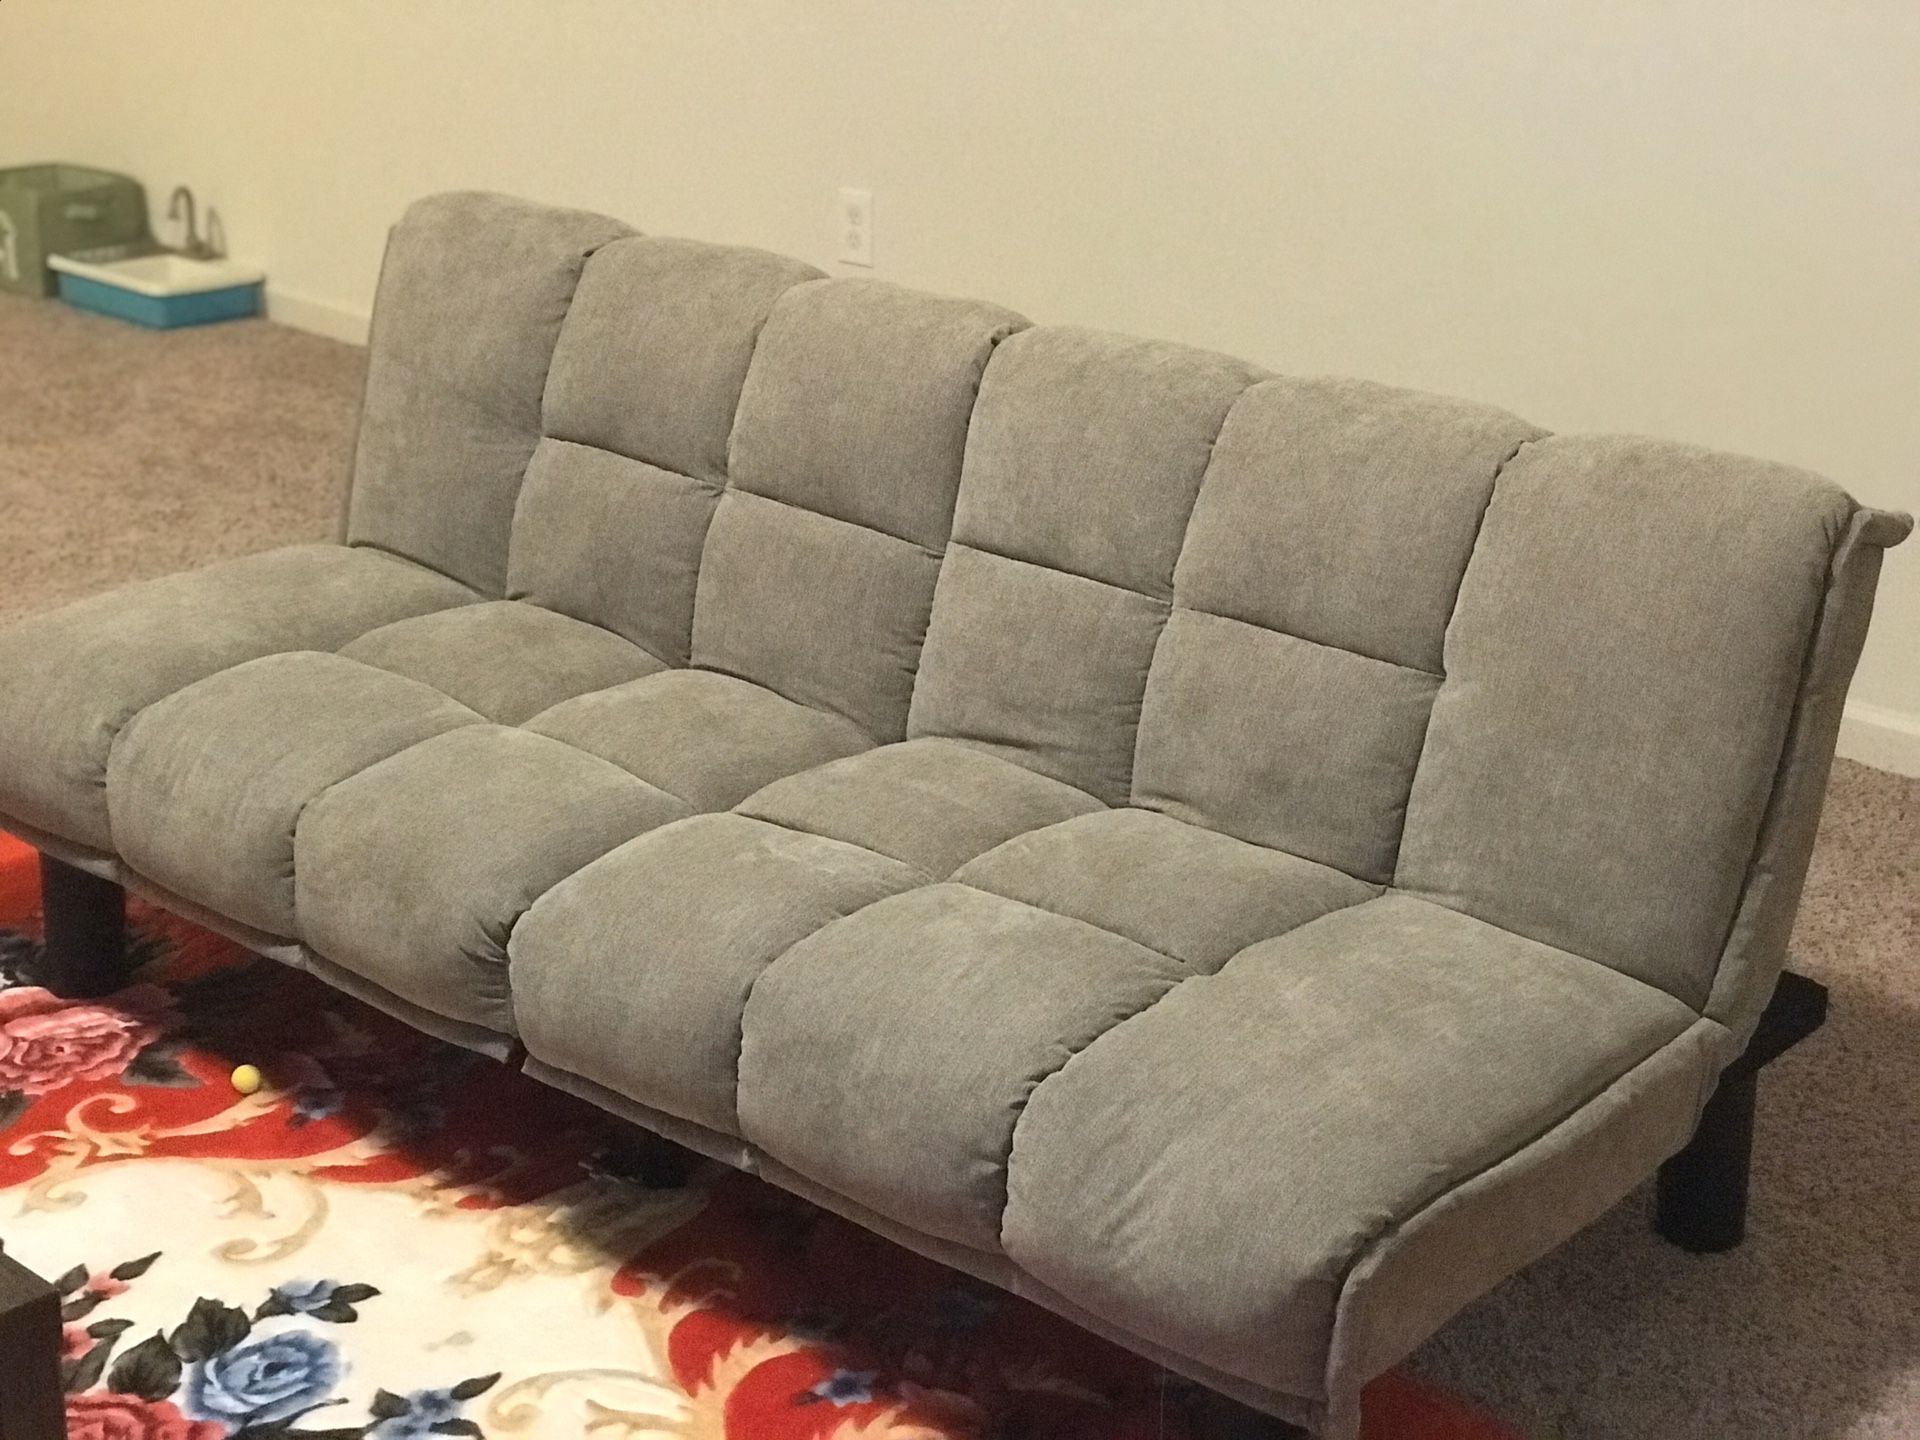 2 month old futon - like new!! Lawrenceville, GA GREAT PRICE!!!